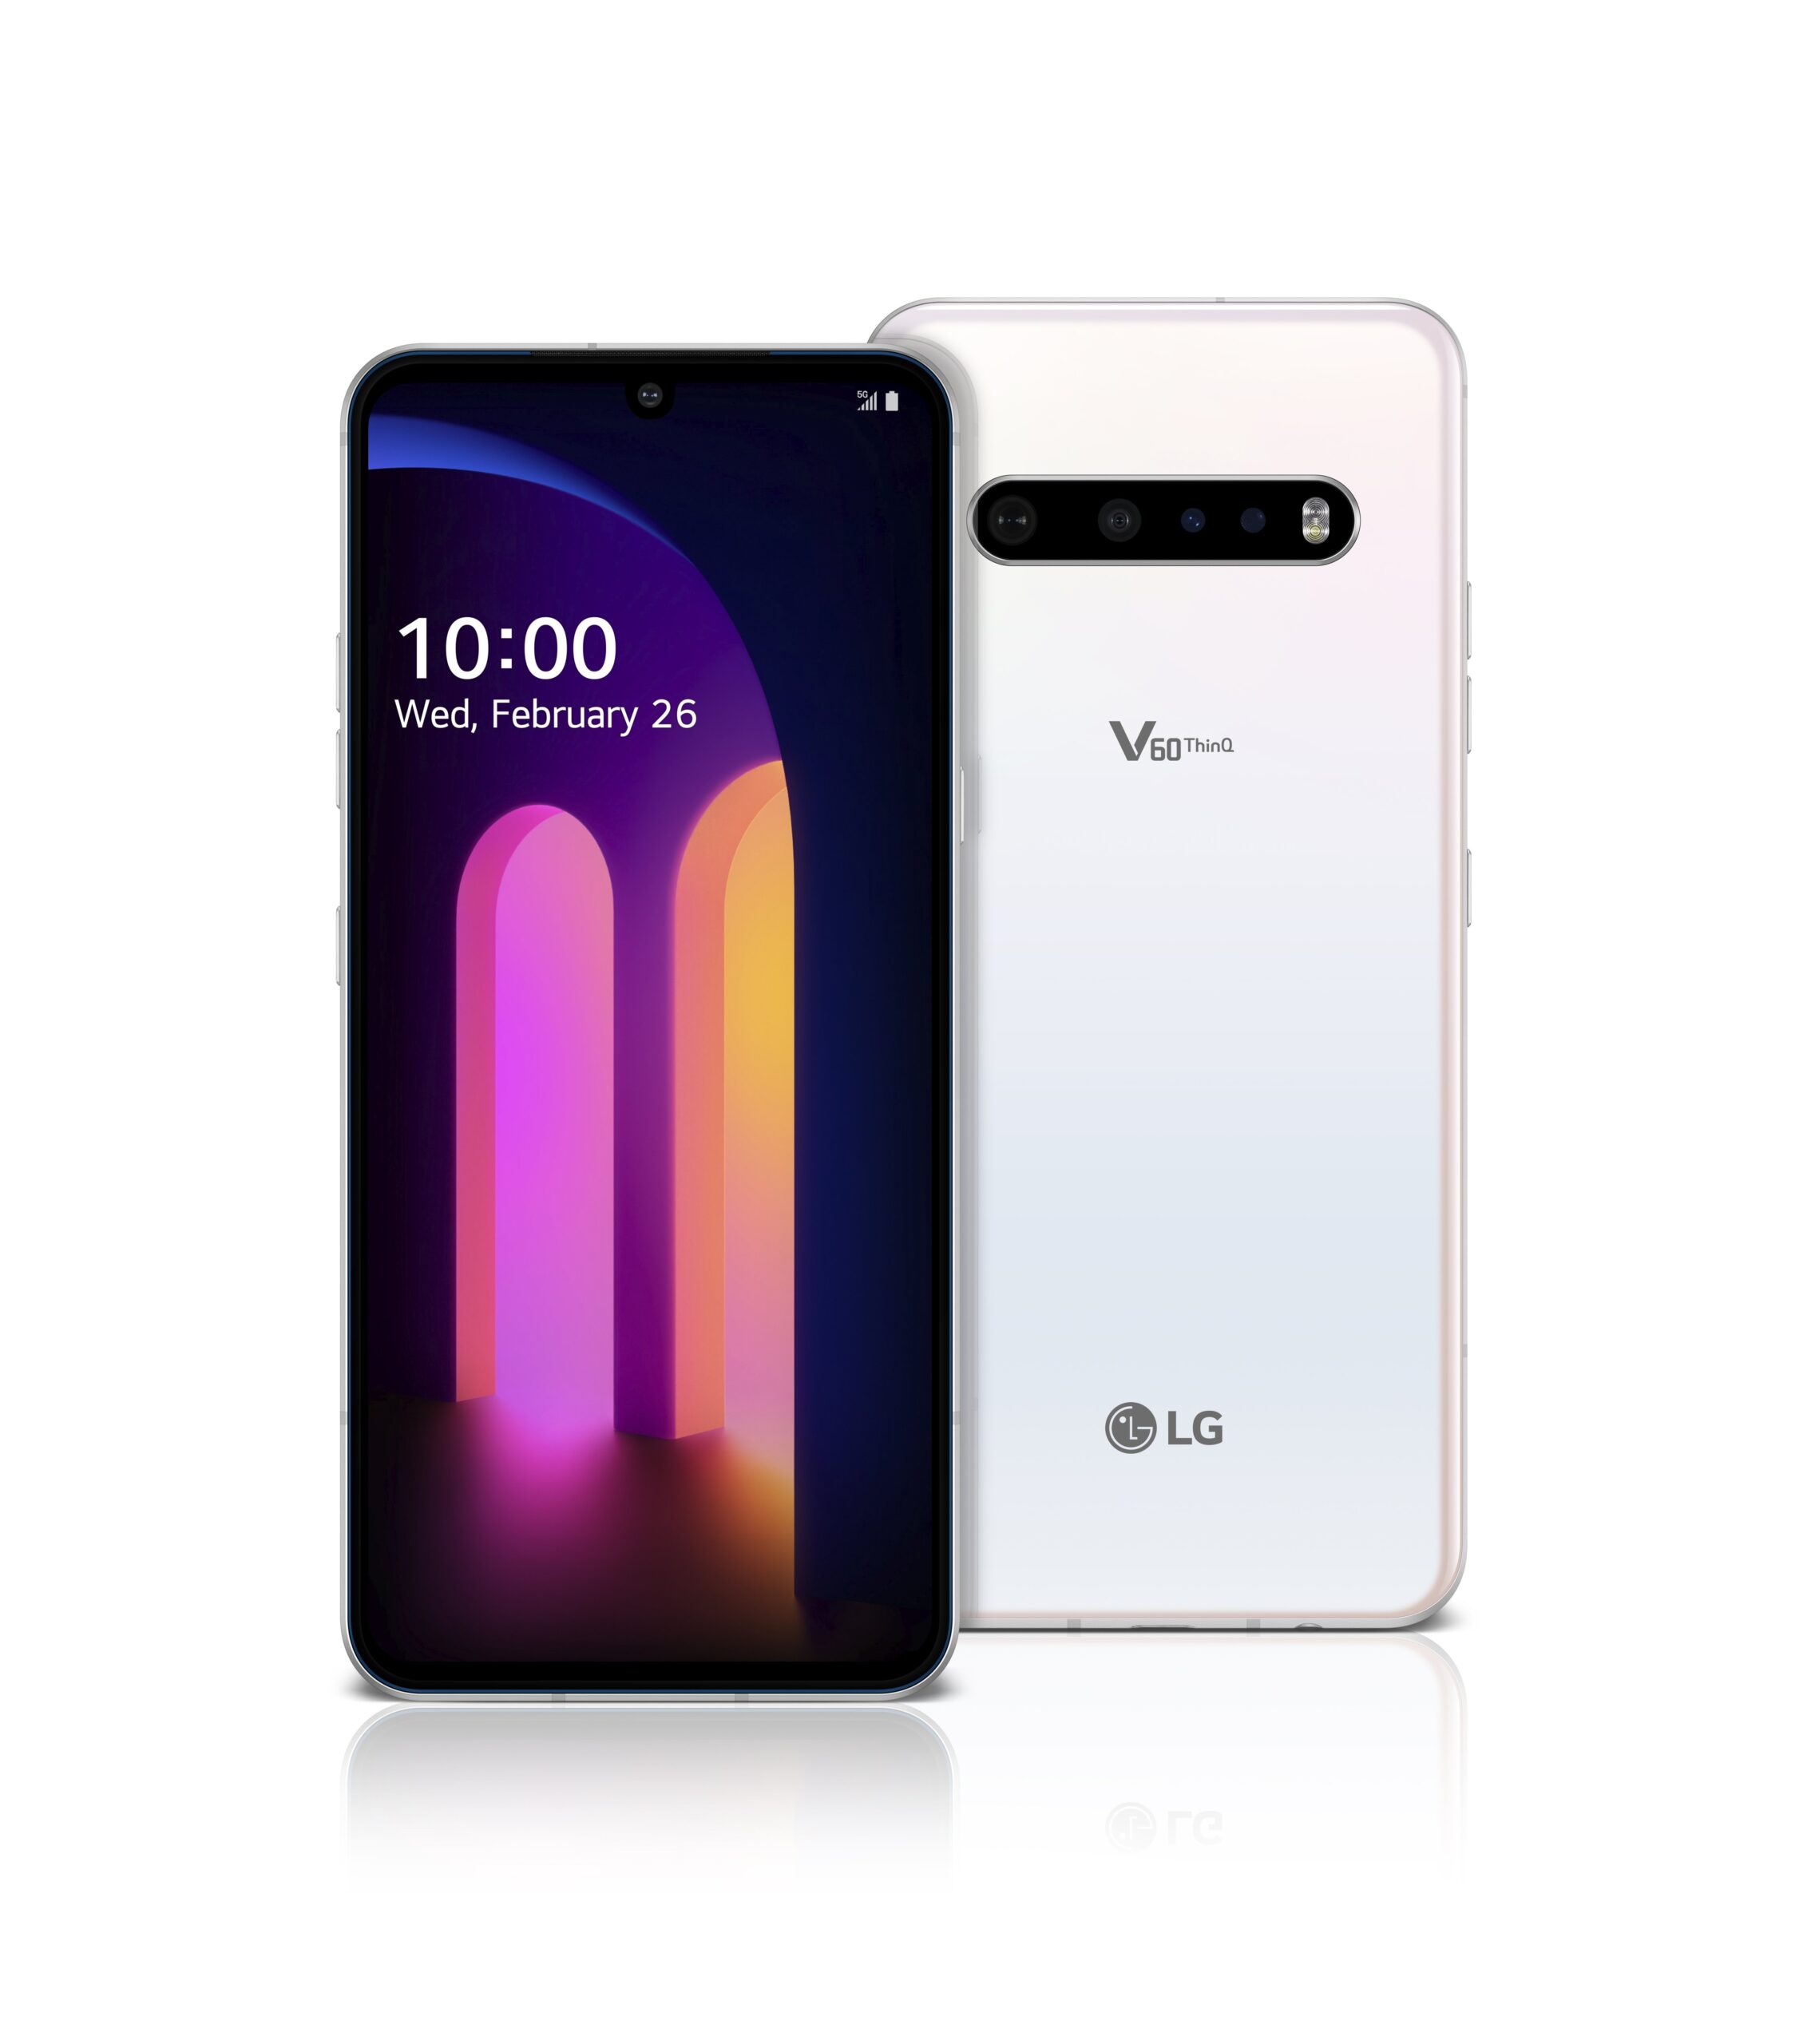 LG Announces V60 ThinQ 5G with LG Dual Screen, Designed for a 